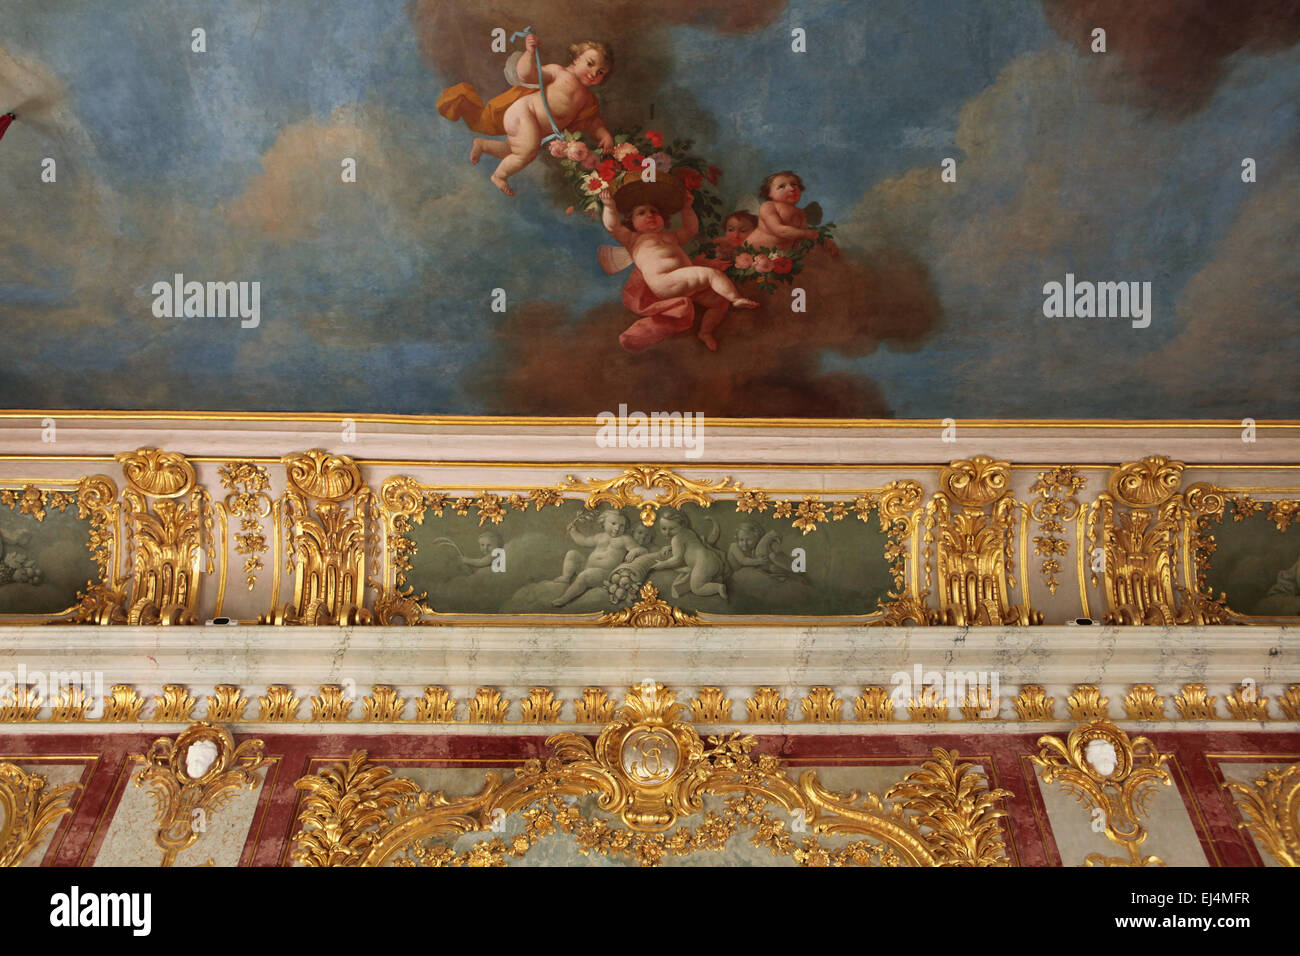 Baroque stucco decoration by German sculptor Johann Michael Graff in the Gold Hall of the Rundale Palace, Latvia. The ceiling painting by Francesco Martini and Carlo Zucchi depicts the Apotheosis of the Duke of Courland Ernst Johann von Biron, The monogram JB of Ernst Johann von Biron is seen bellow. Stock Photo